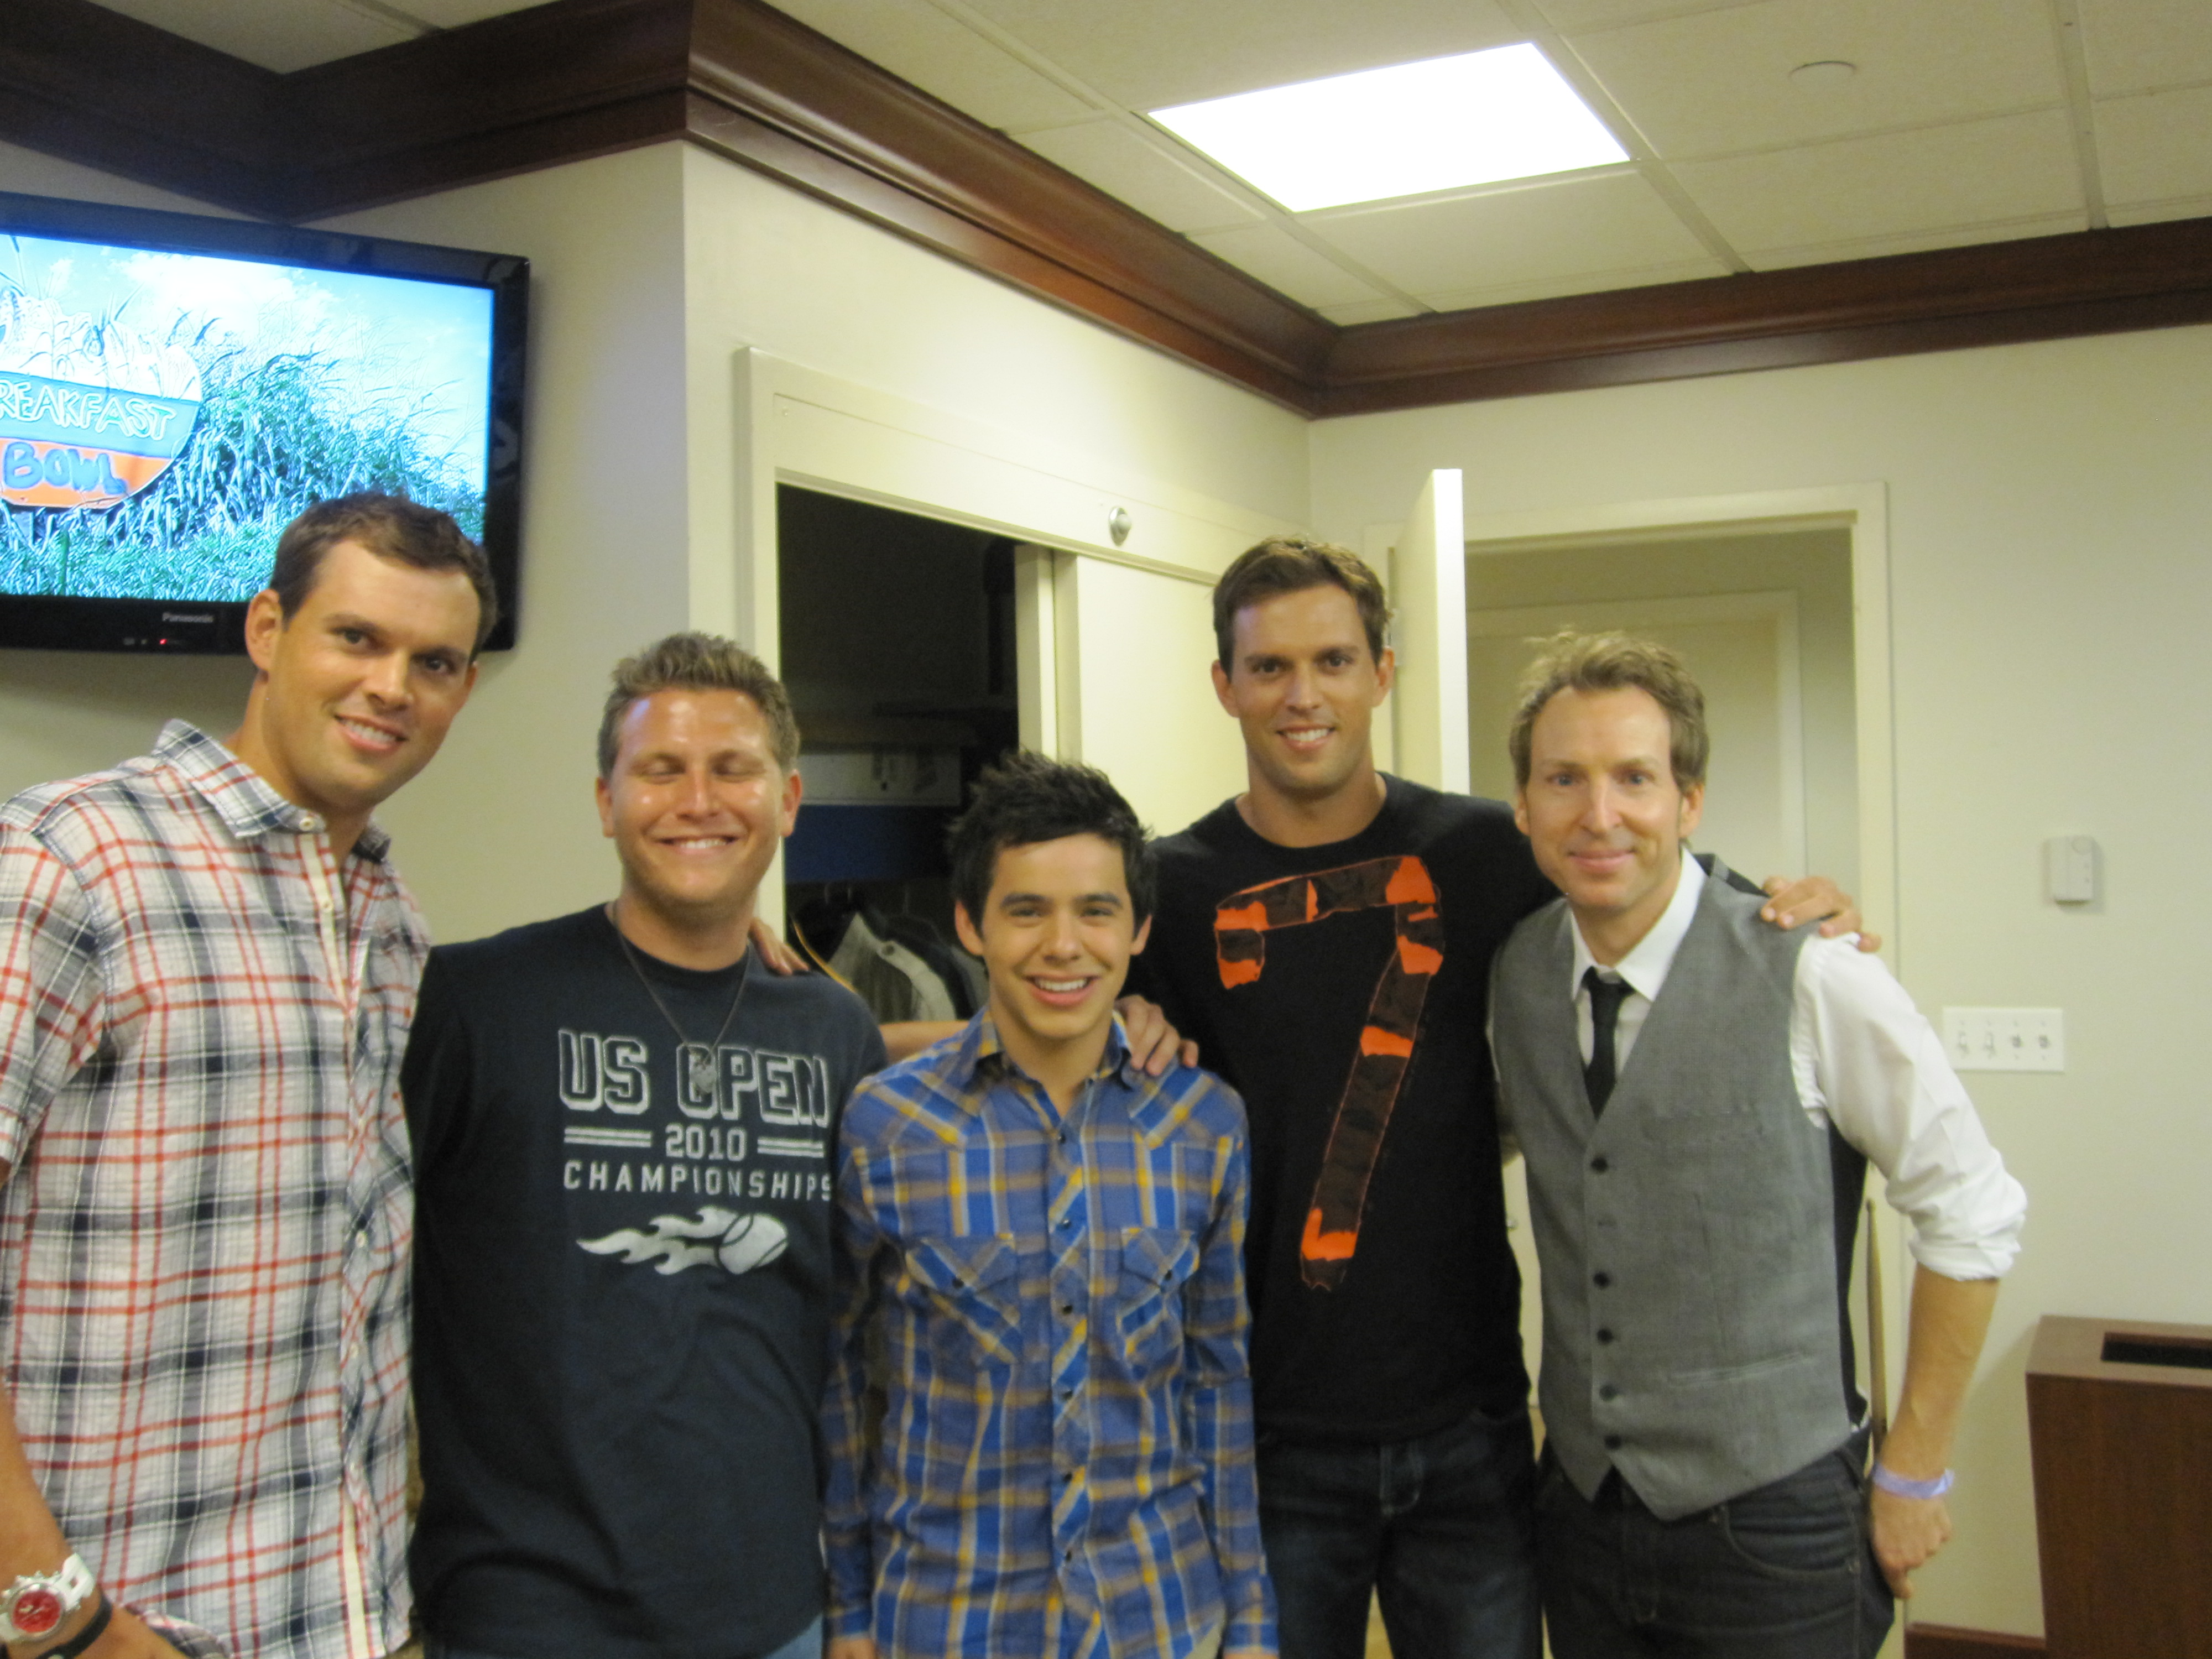 Hanging with David Archuleta in the dressing room before the show at A.A. Kids Day